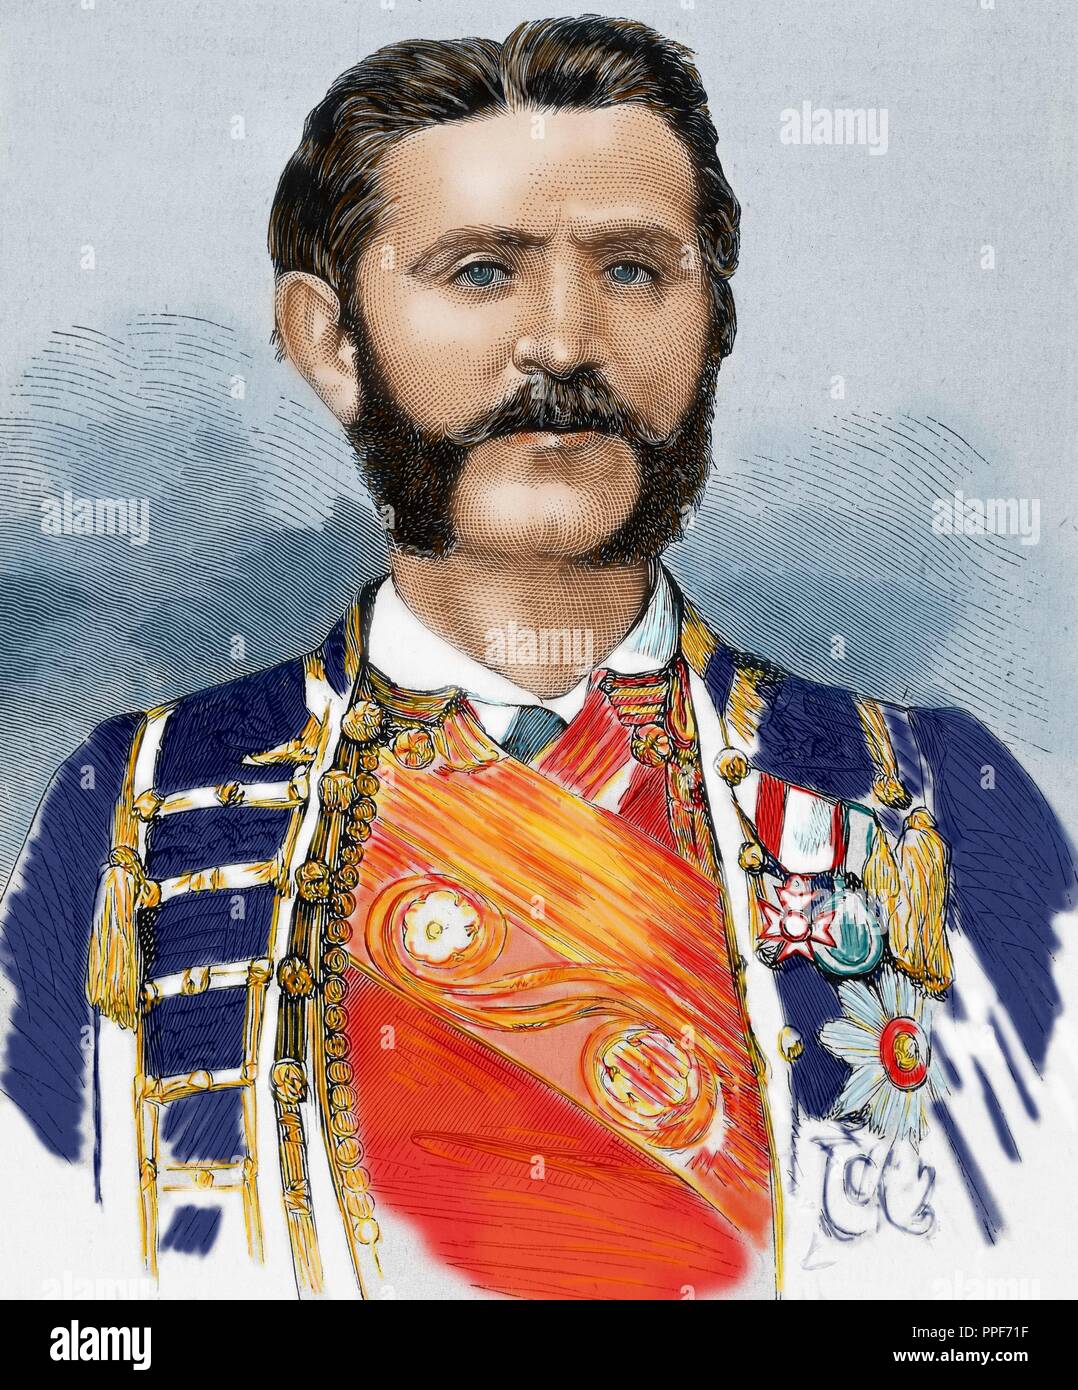 Nicholas I (1841- 1921). Prince (1860-1910) and King of Montenegro (1910-1918). Acceded to the throne after the murder of his uncle Danilo I (1860). Colored engraving. 1875. Stock Photo